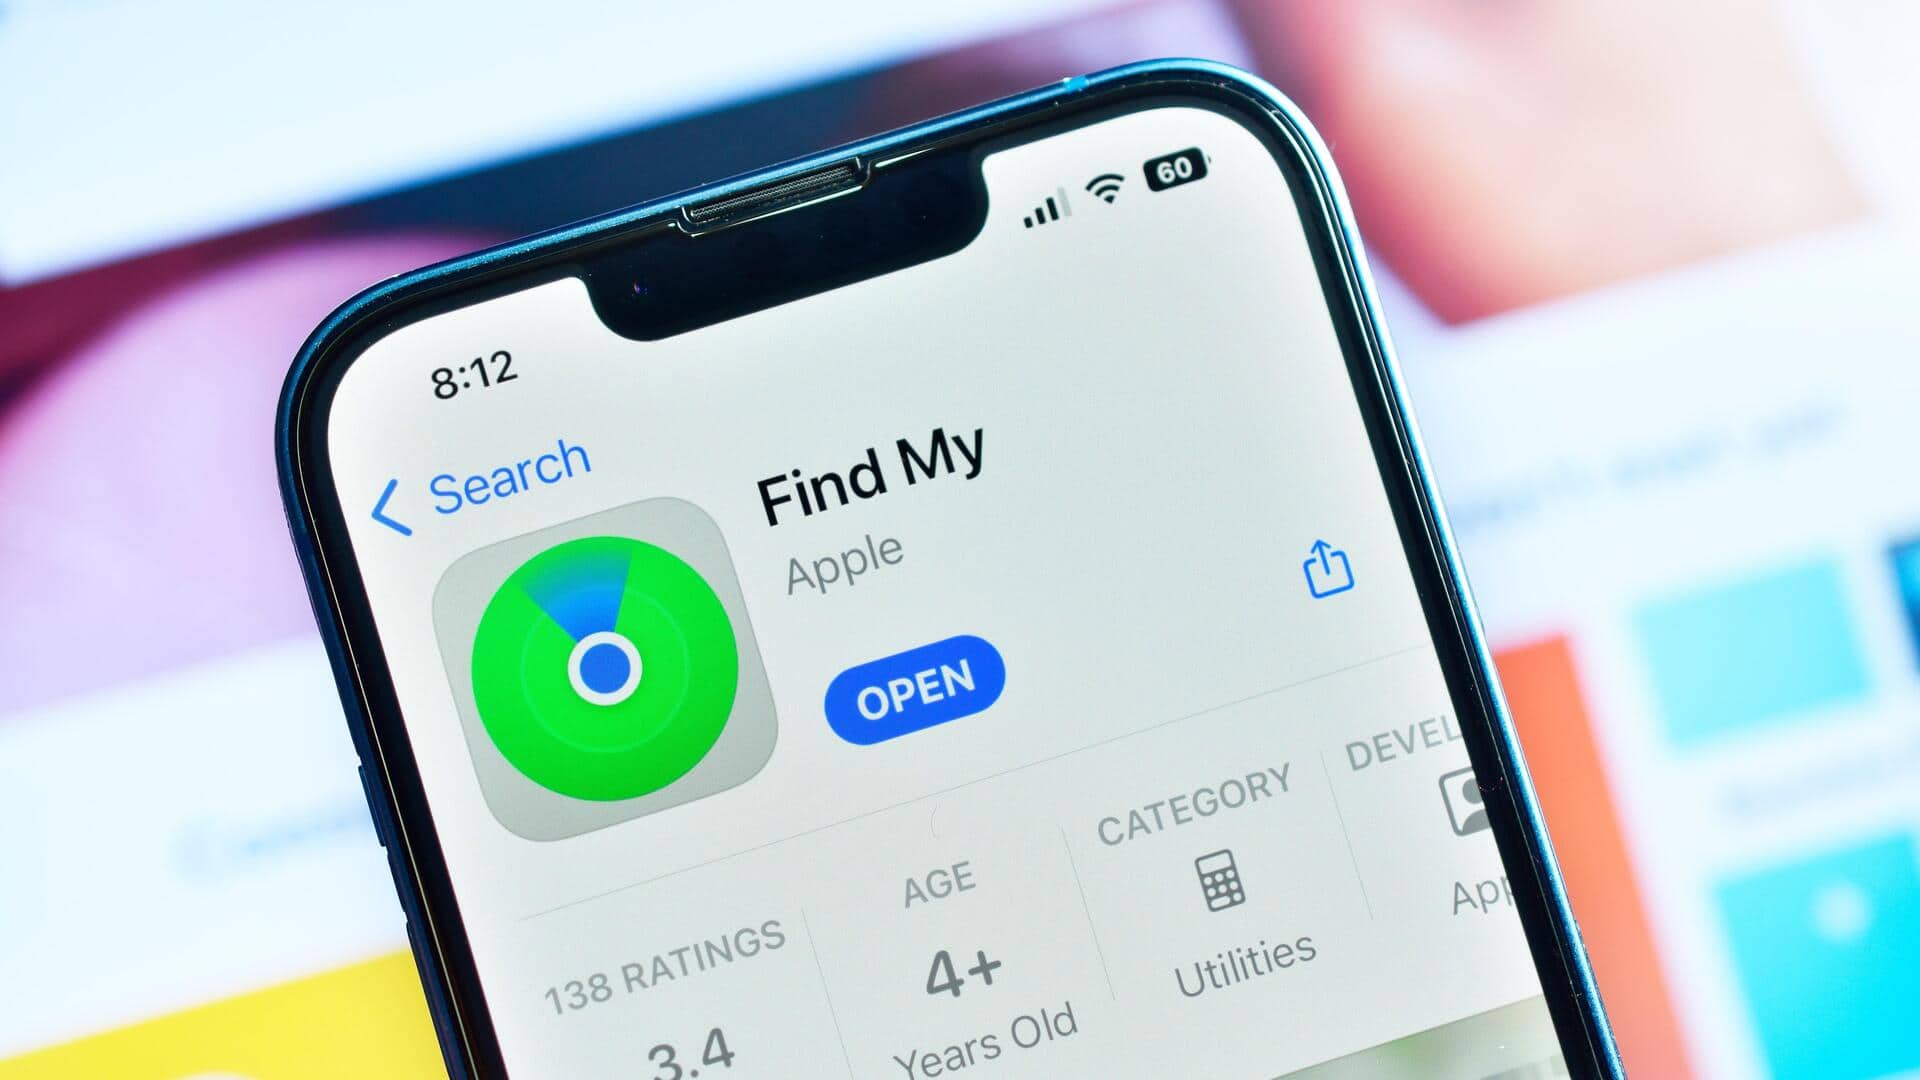 Apple's Find My now allows users to track 32 items